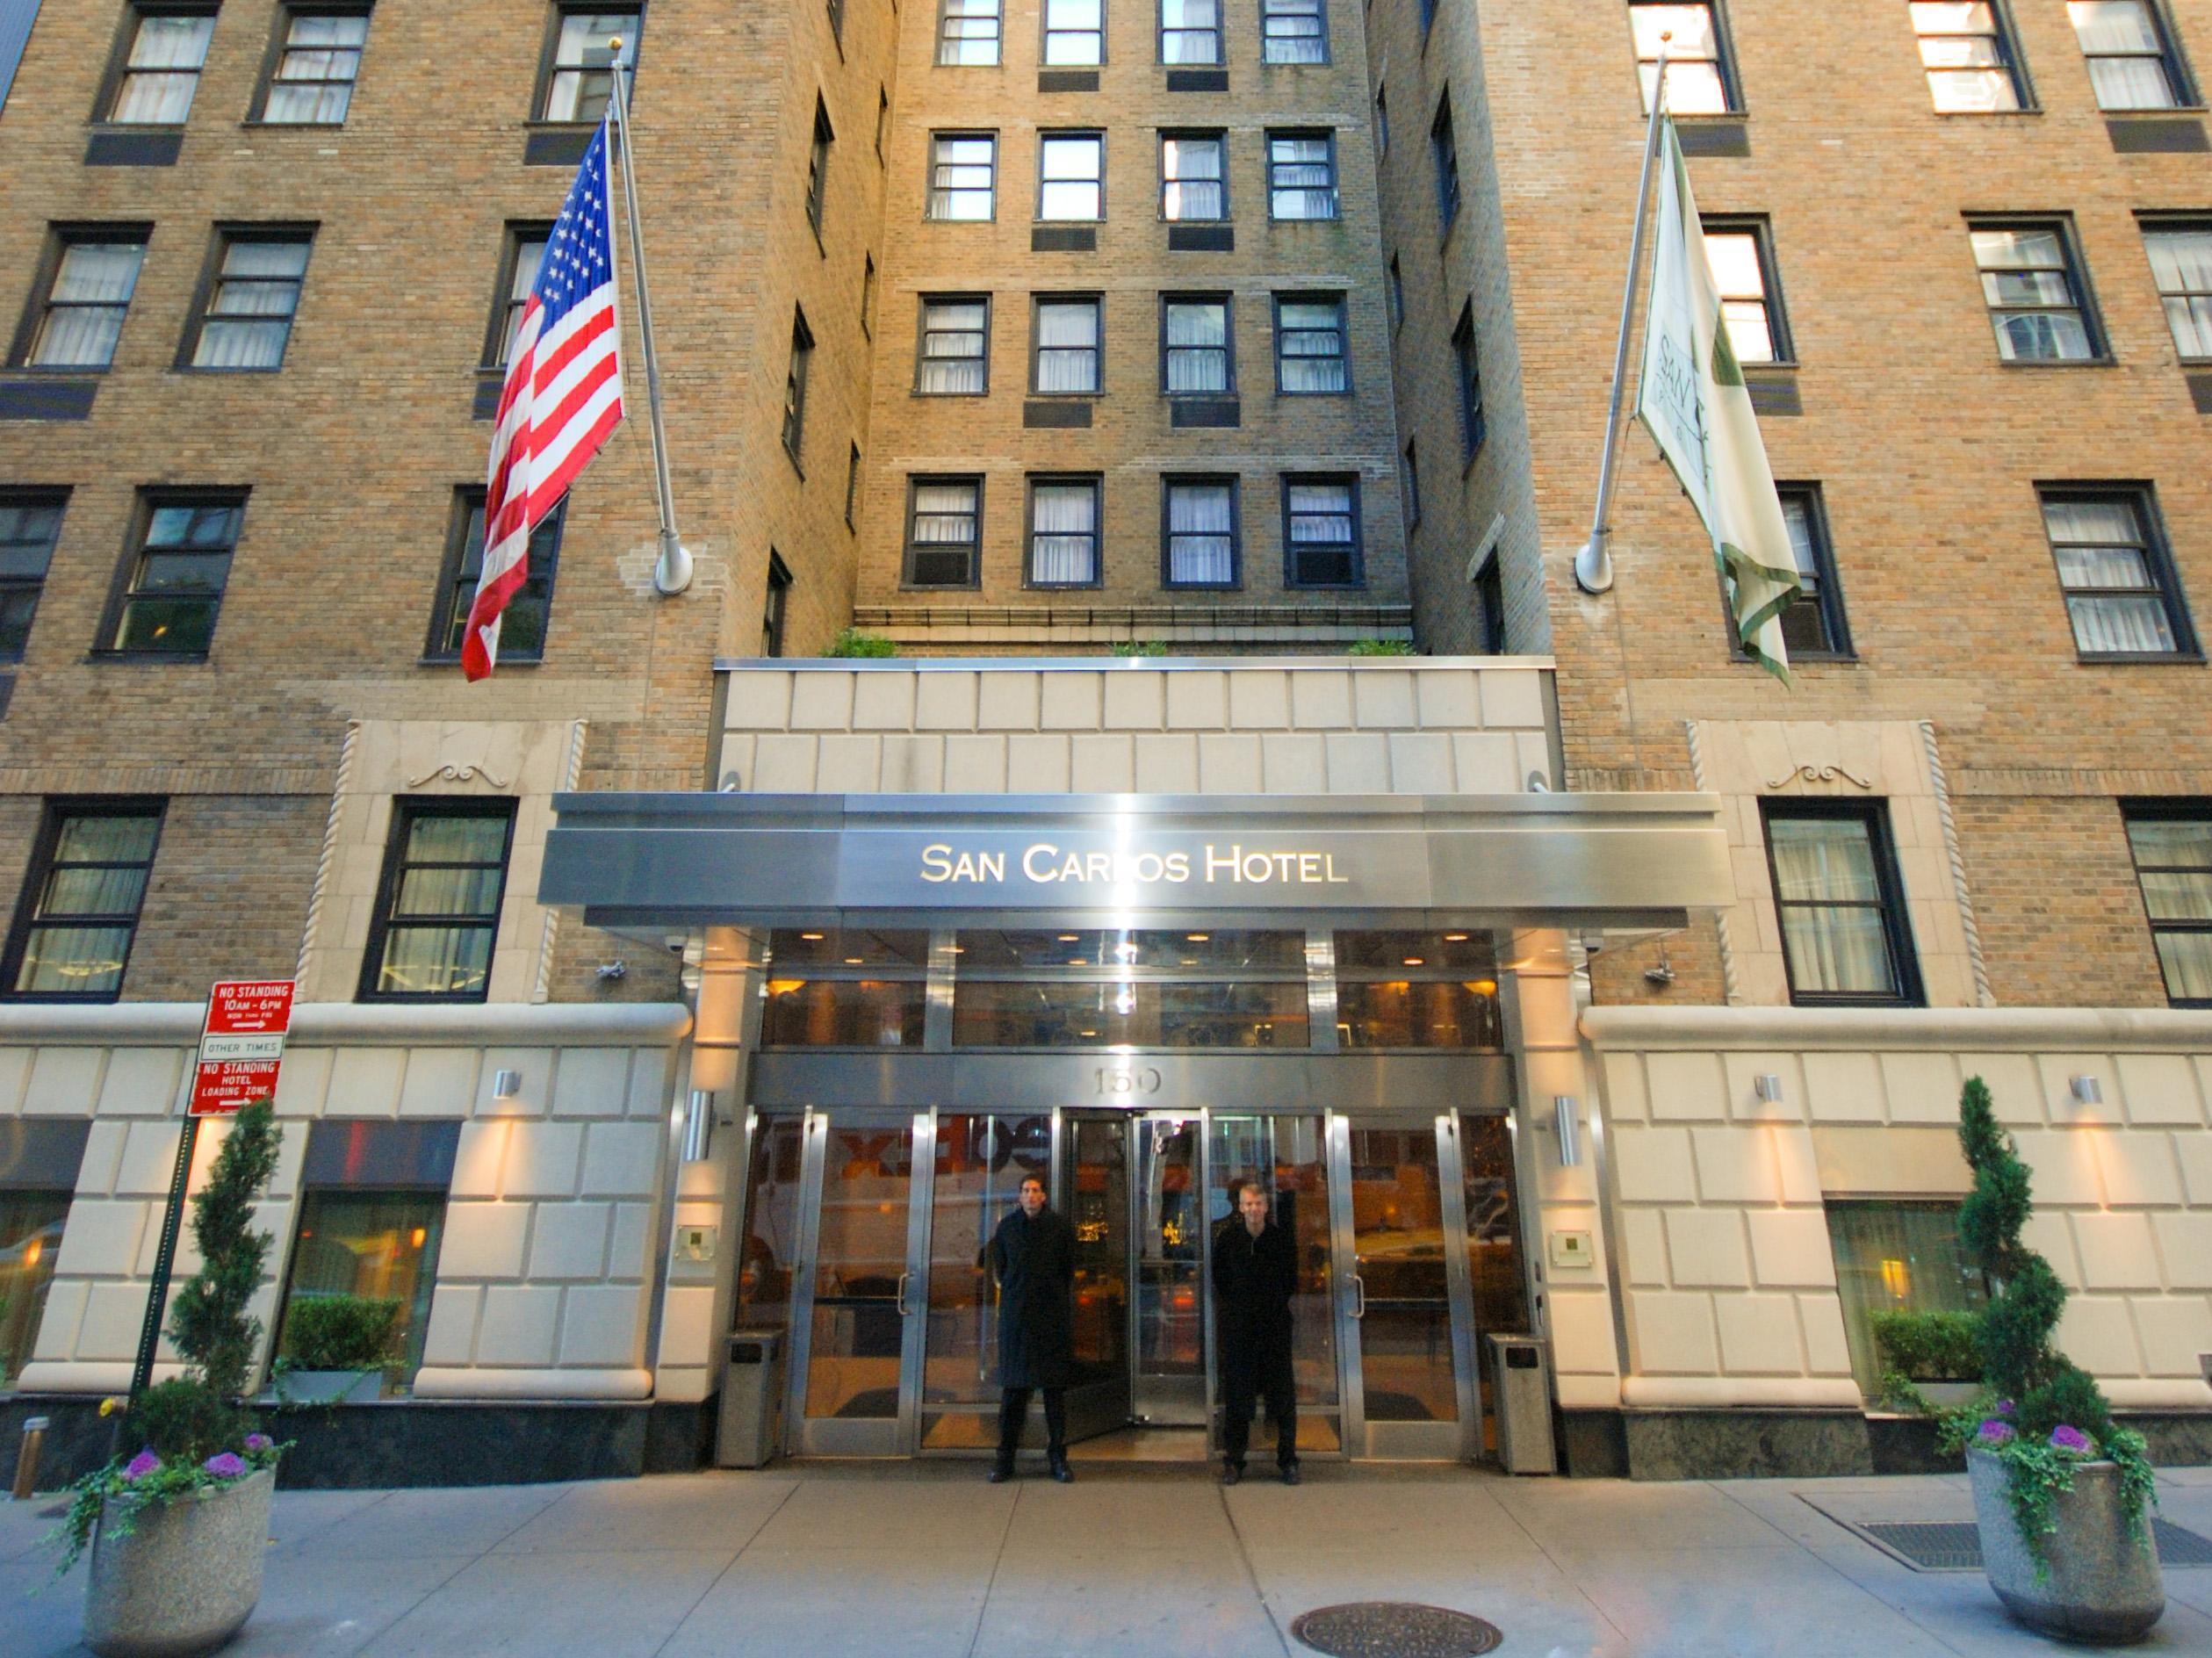 San Carlos Hotel New York State 
 FAQ 2016, What facilities are there in San Carlos Hotel New York State 
 2016, What Languages Spoken are Supported in San Carlos Hotel New York State 
 2016, Which payment cards are accepted in San Carlos Hotel New York State 
 , New York State 
 San Carlos Hotel room facilities and services Q&A 2016, New York State 
 San Carlos Hotel online booking services 2016, New York State 
 San Carlos Hotel address 2016, New York State 
 San Carlos Hotel telephone number 2016,New York State 
 San Carlos Hotel map 2016, New York State 
 San Carlos Hotel traffic guide 2016, how to go New York State 
 San Carlos Hotel, New York State 
 San Carlos Hotel booking online 2016, New York State 
 San Carlos Hotel room types 2016.